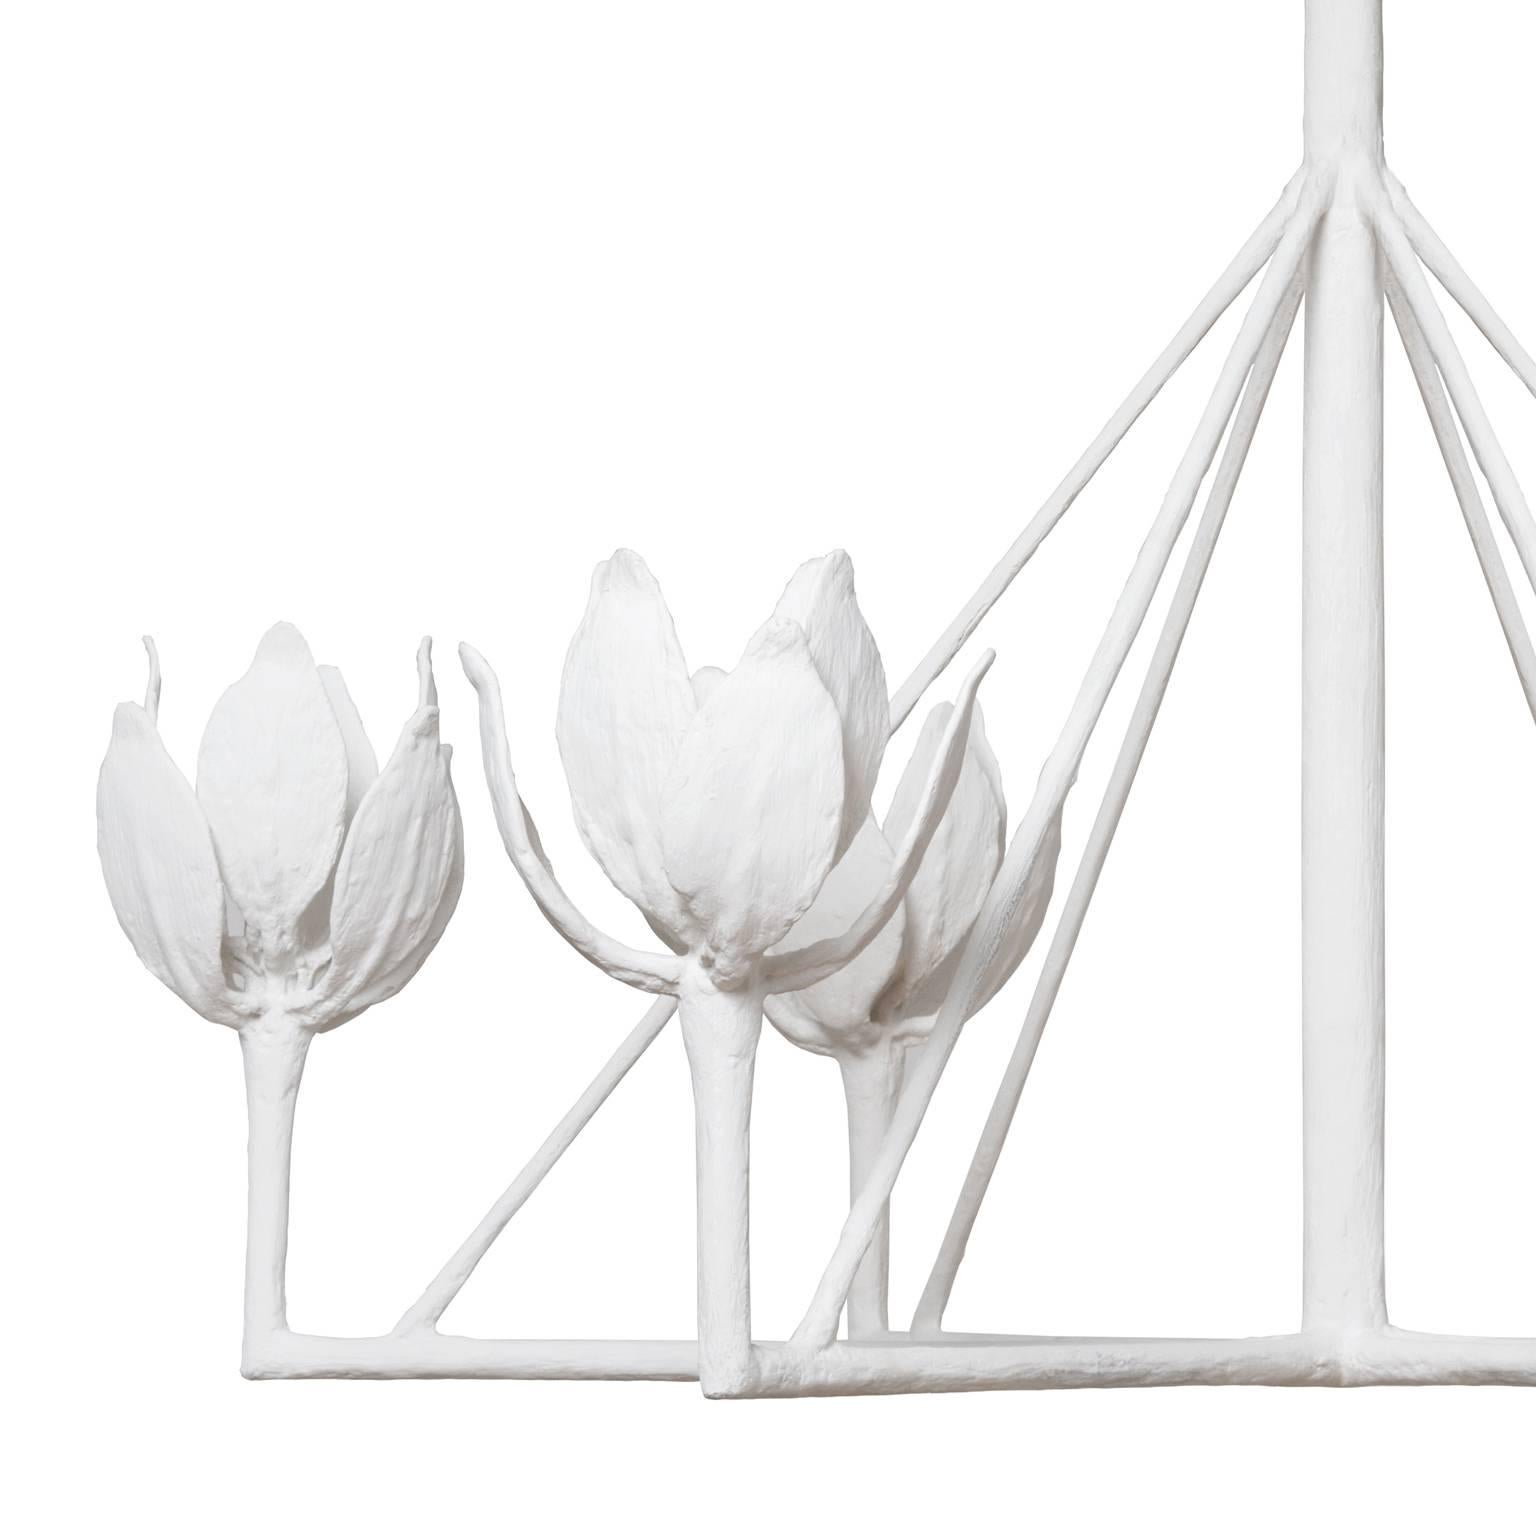 Atelier Demiurge Editions Flora Chandelier shown in white plaster with six lights. Also available in blackened steel. Inquire for customization options.

Atelier Demiurge Editions pieces are made to order, and custom sizes are available. Please